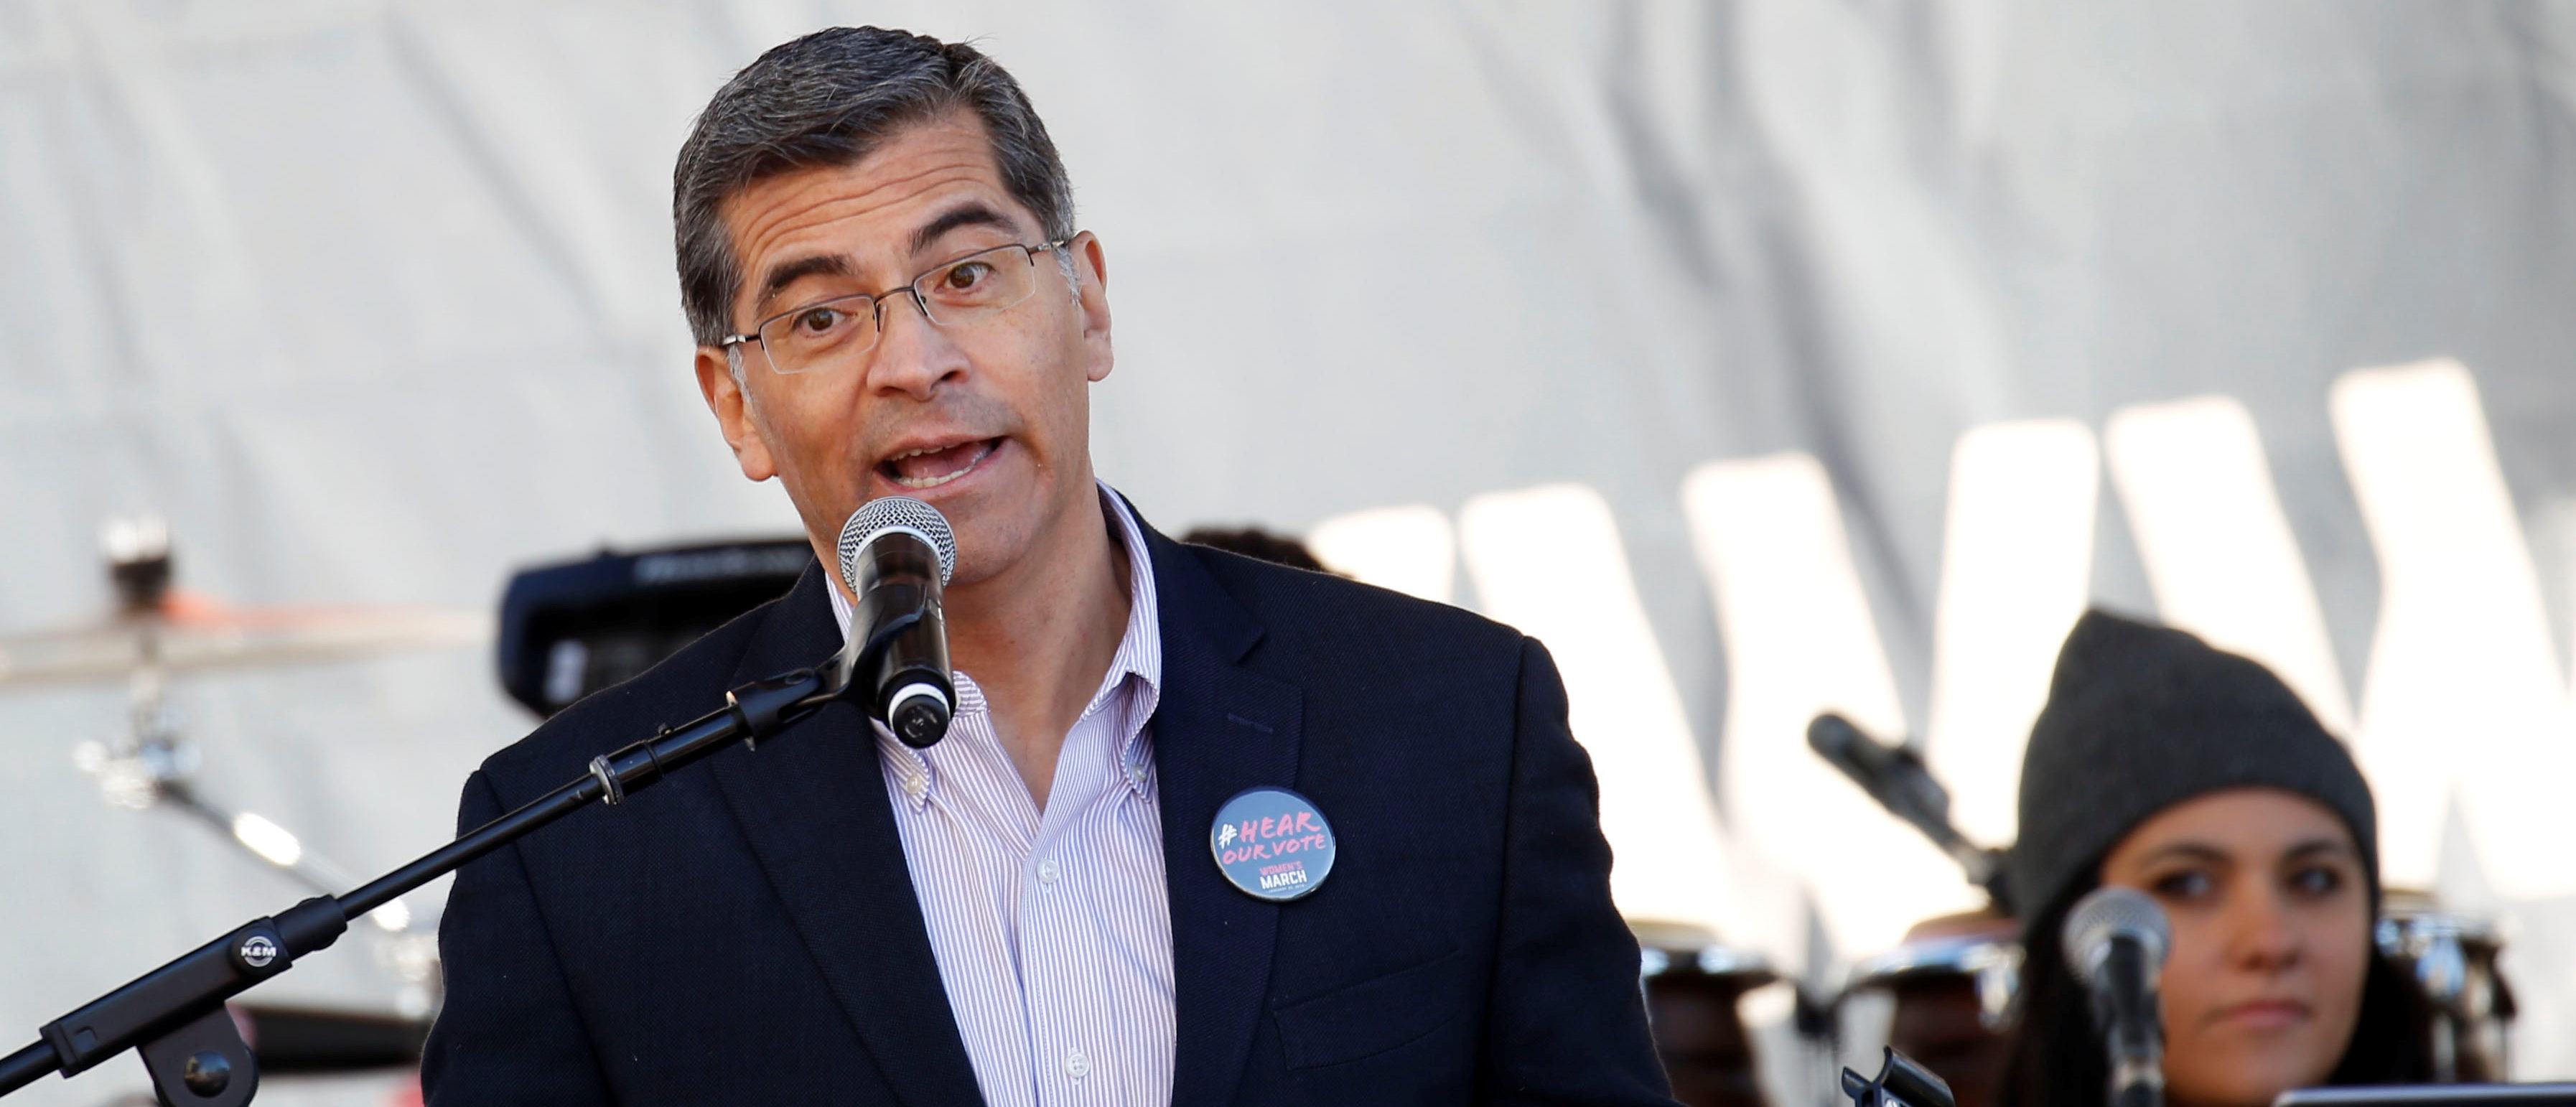 California Attorney General Xavier Becerra speaks at the second annual Women's March in Los Angeles, California